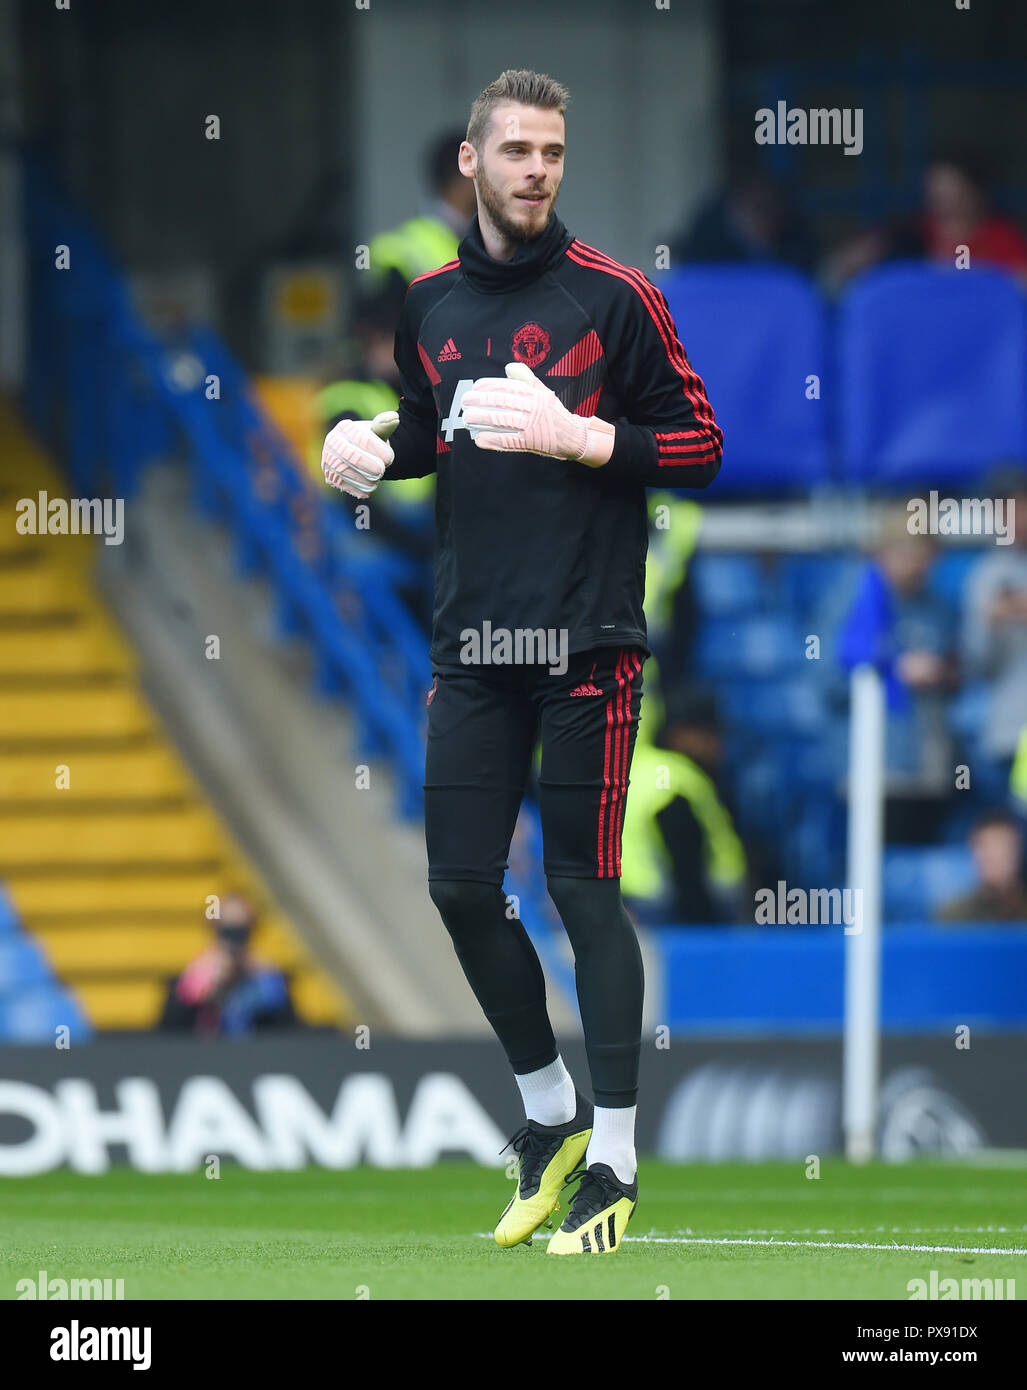 London, UK. 20th October 2018. David De Gea of Manchester United before the  Premier League match between Chelsea and Manchester United at Stamford  Bridge on October 20th 2018 in London, England. Credit: